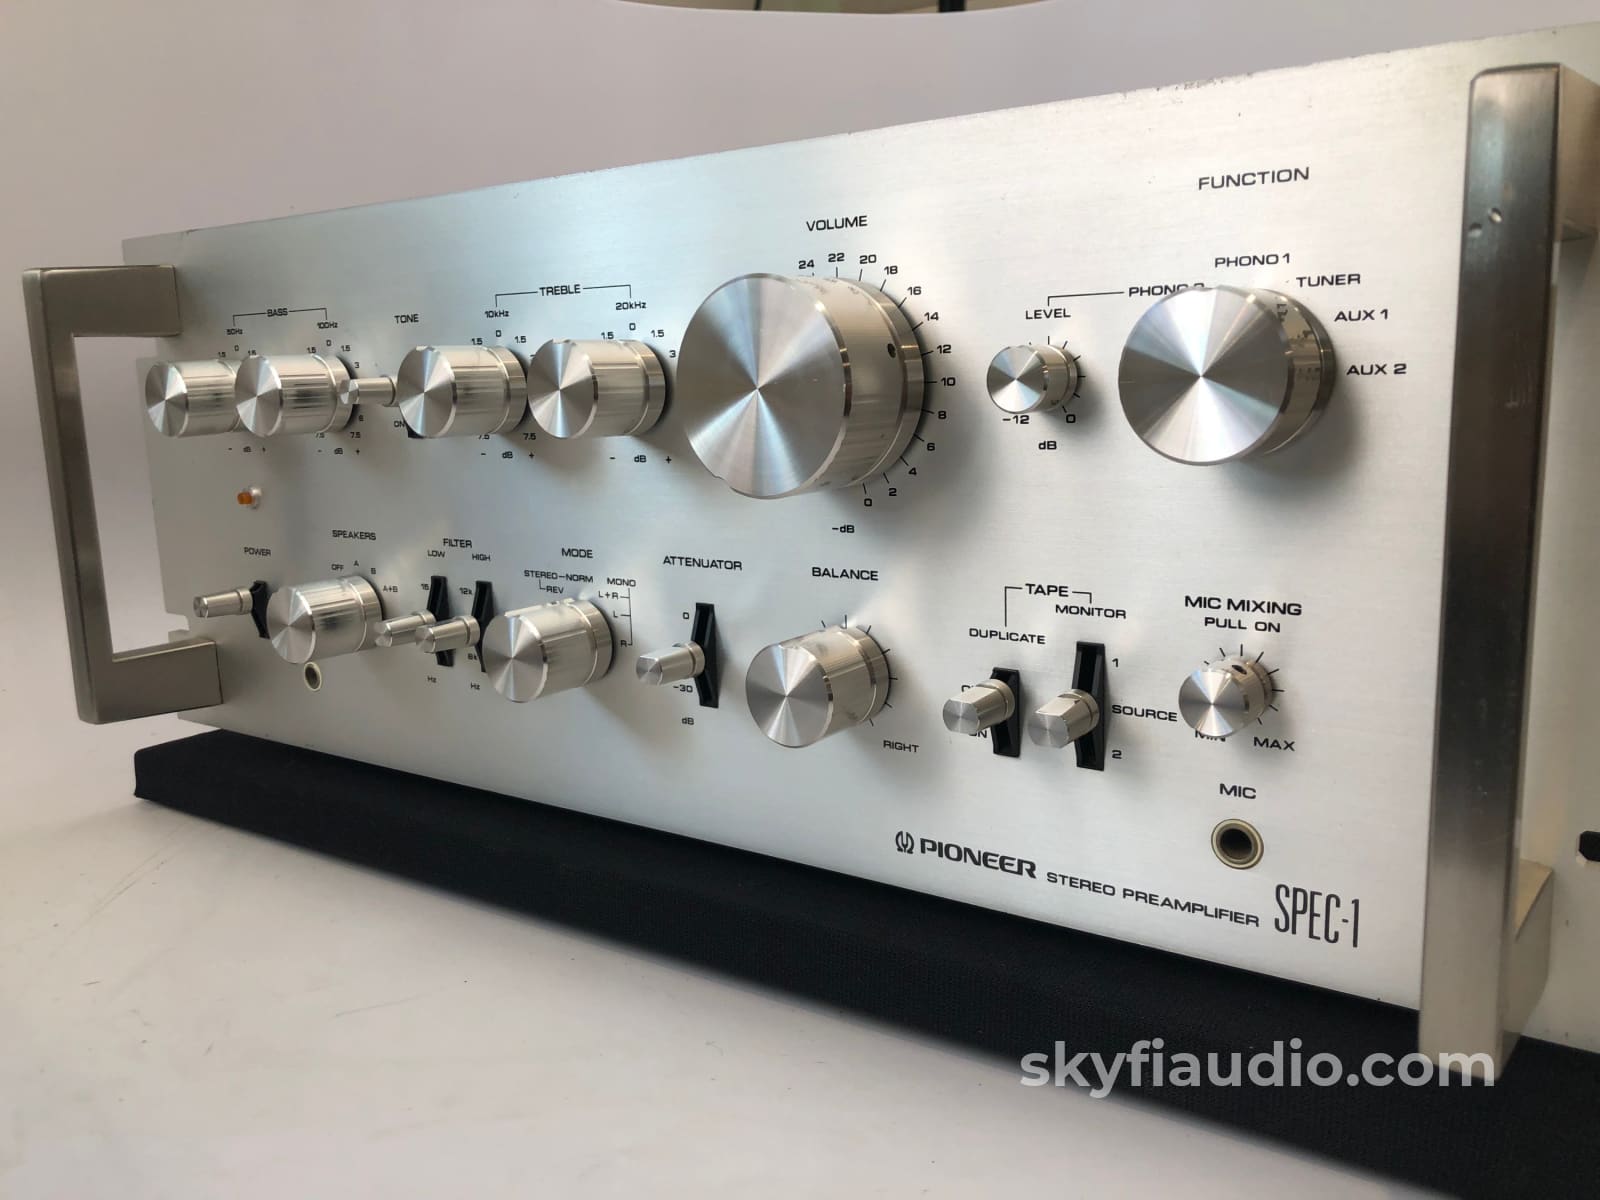 Pioneer Spec-1 Vintage Solid State Stereo Preamp With Phono - 110V/220V Version (A) Preamplifier